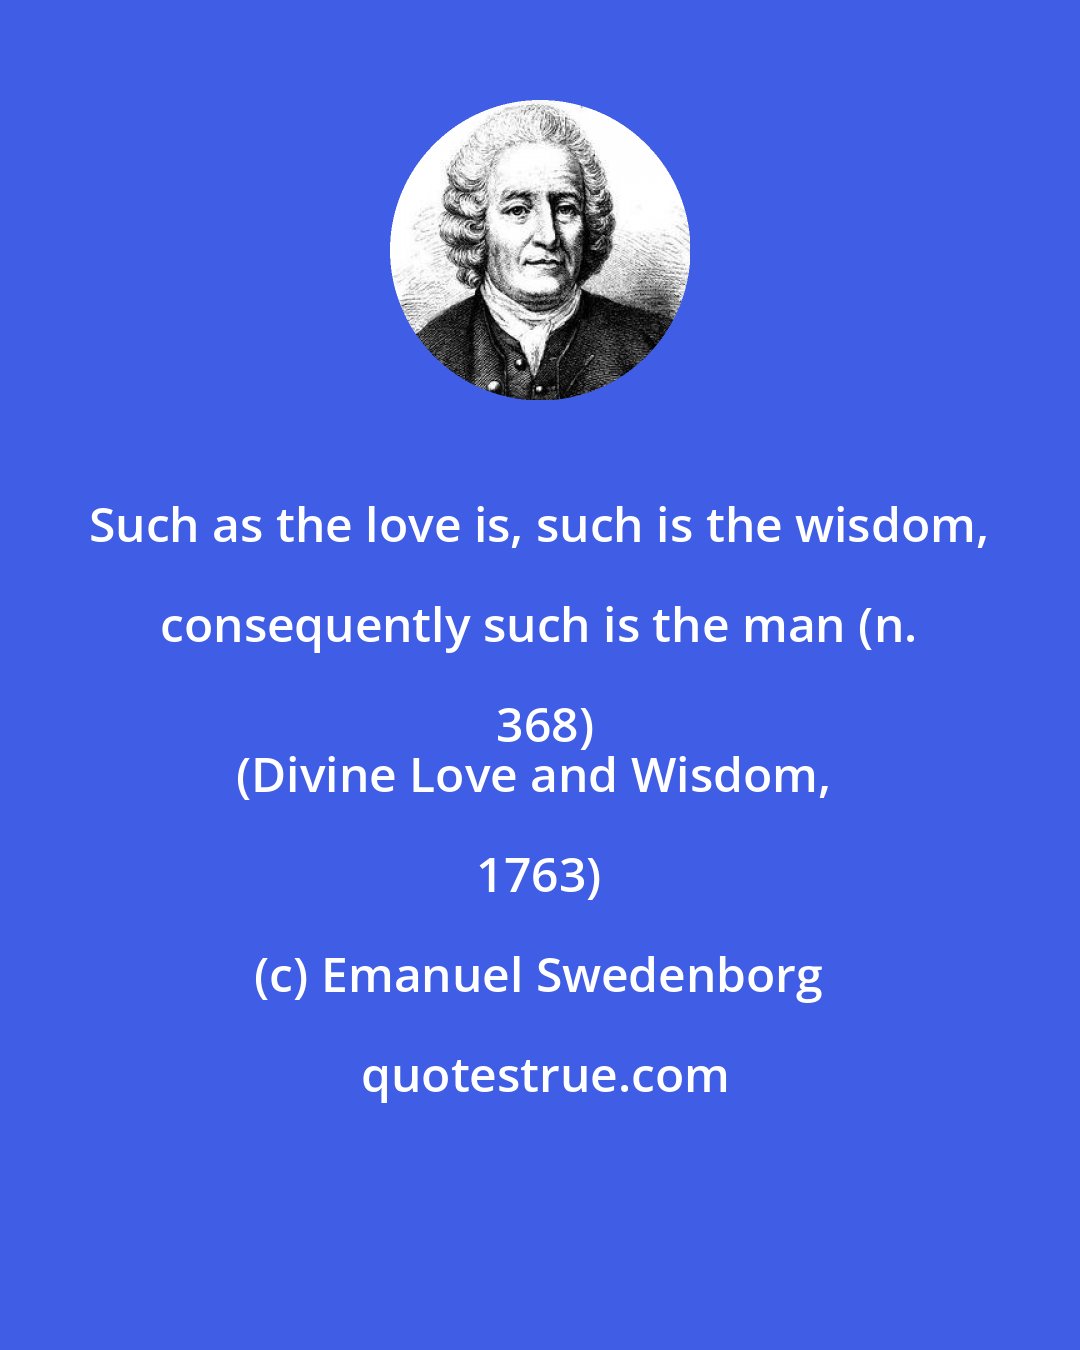 Emanuel Swedenborg: Such as the love is, such is the wisdom, consequently such is the man (n. 368)
(Divine Love and Wisdom, 1763)